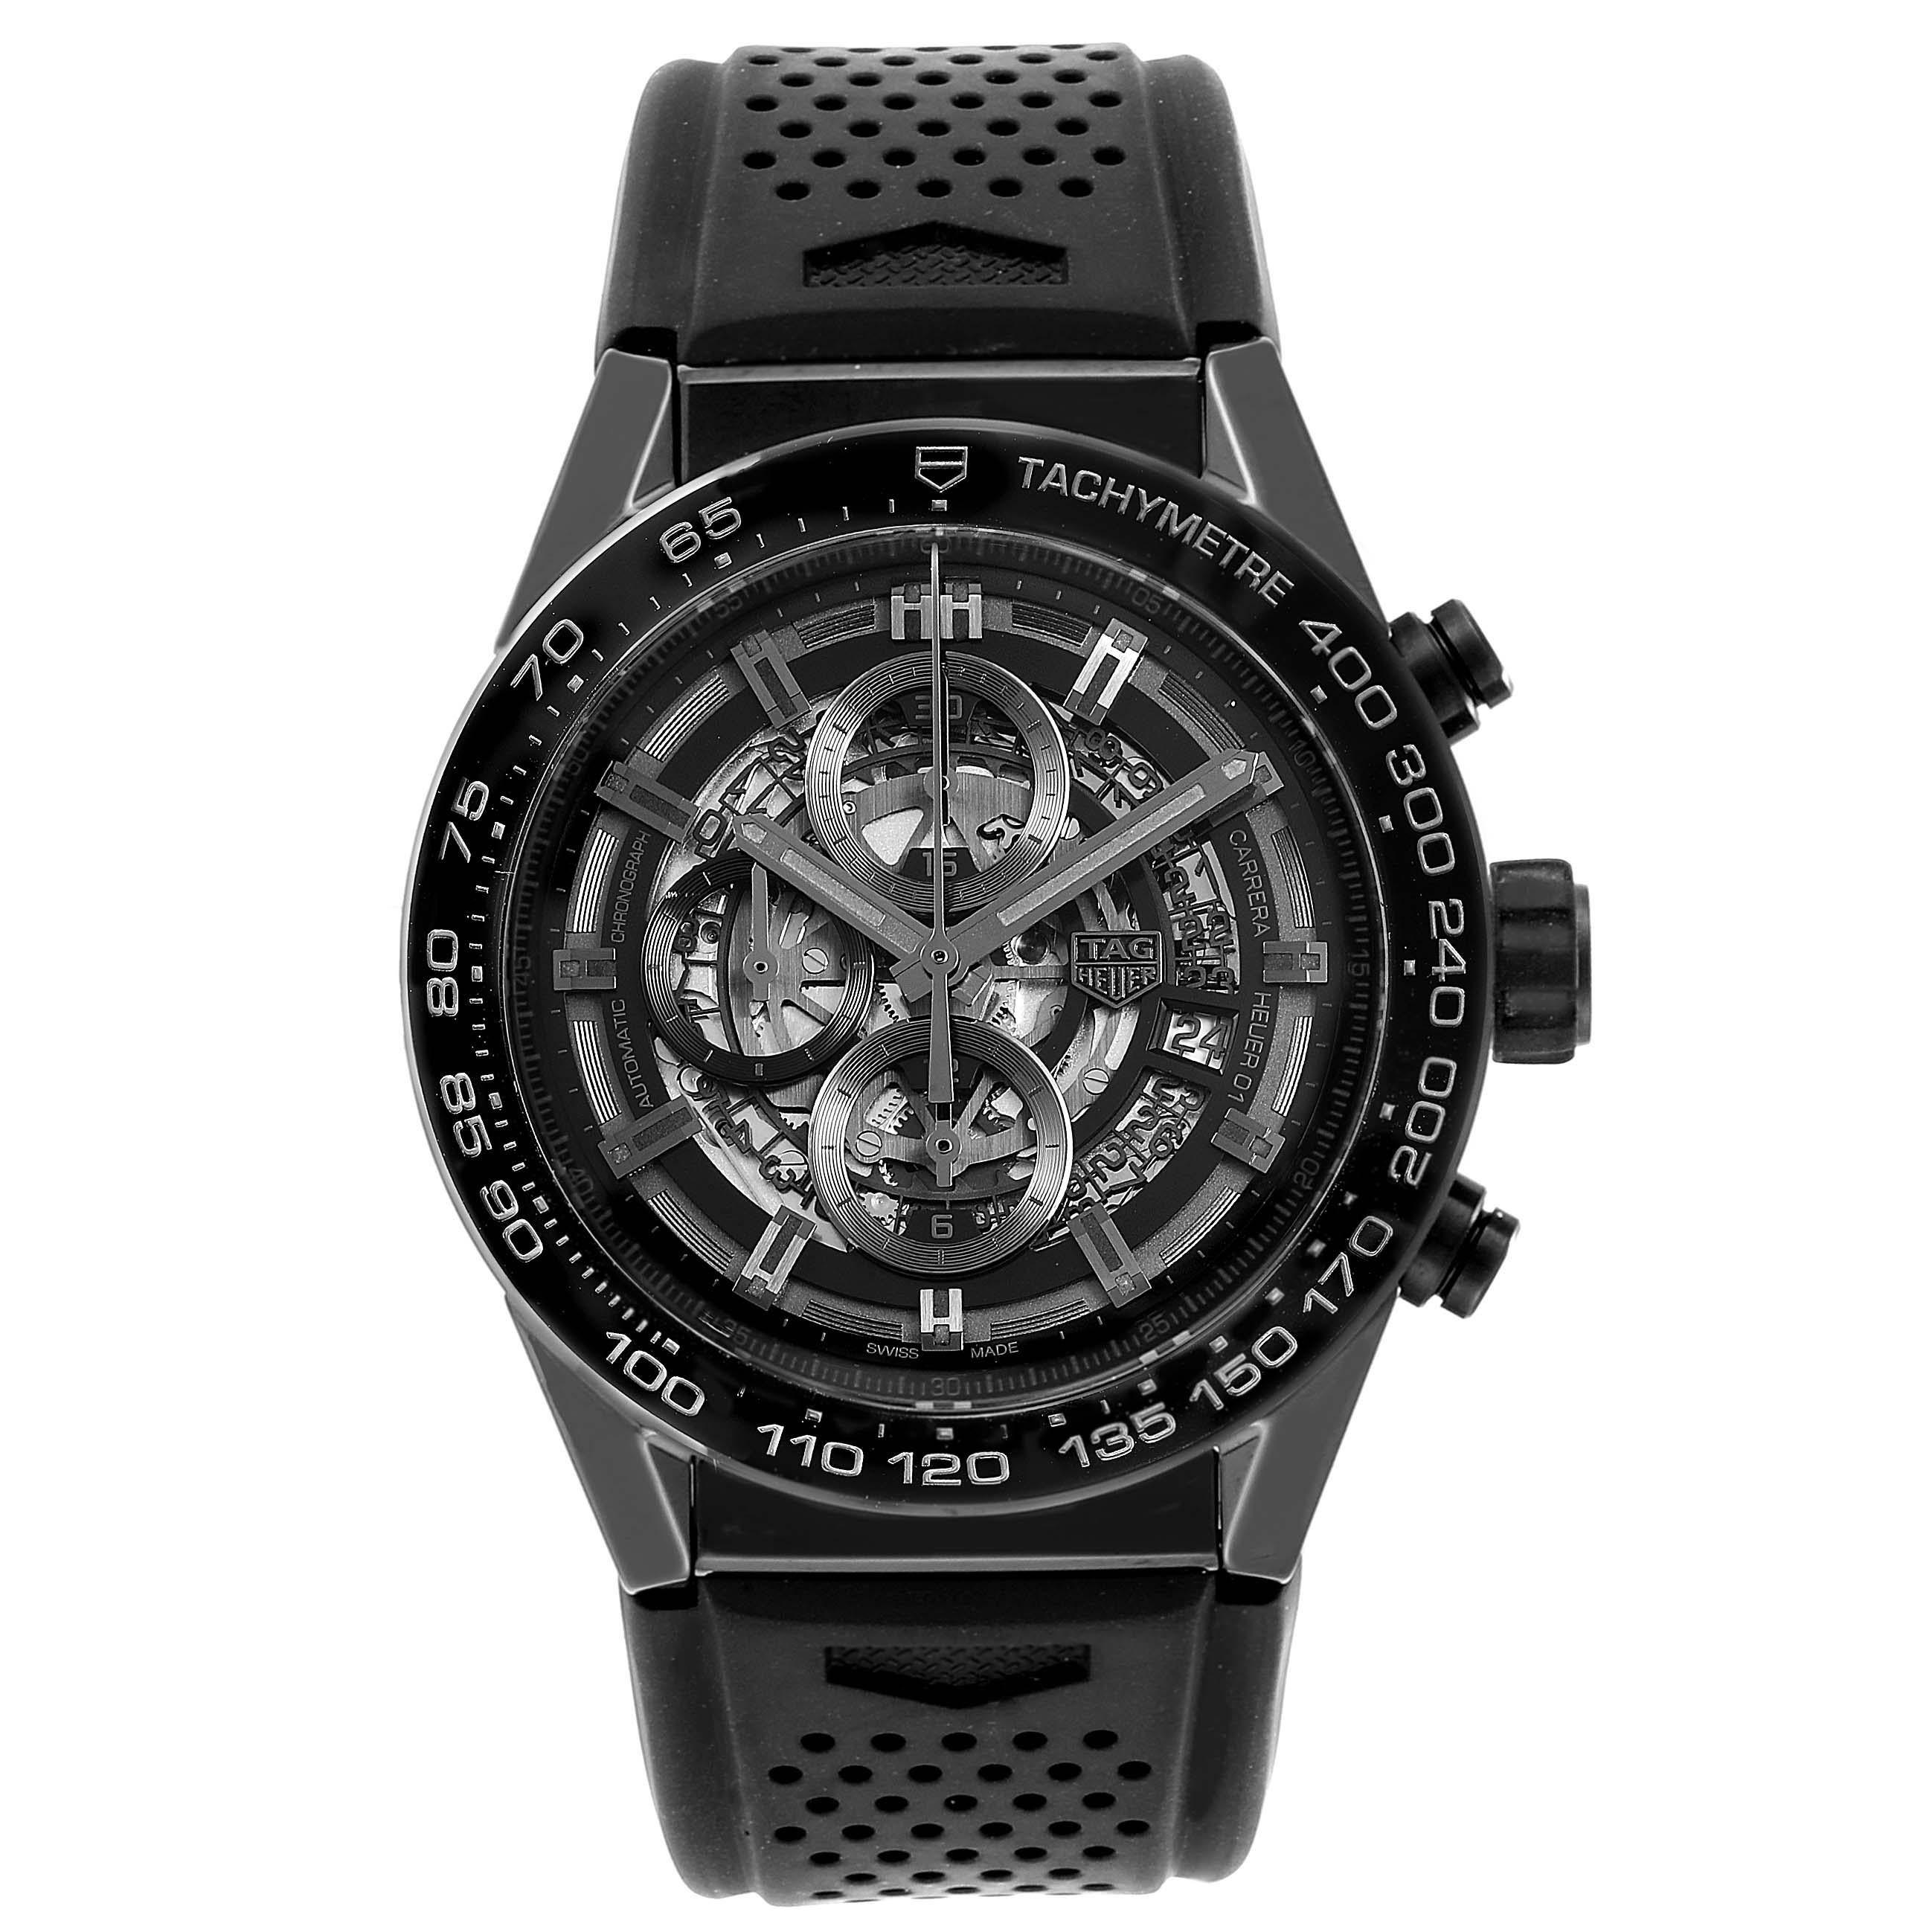 Tag Heuer Carrera Black Ceramic Chronograph Watch CAR2A90 Box Papers. Automatic self-winding movement. Black ceramic case 45.0 mm. Case thickness: 16.5mm. Transperent sapphire crystal back. Uni-directional rotating black ceramic showing tachymeter